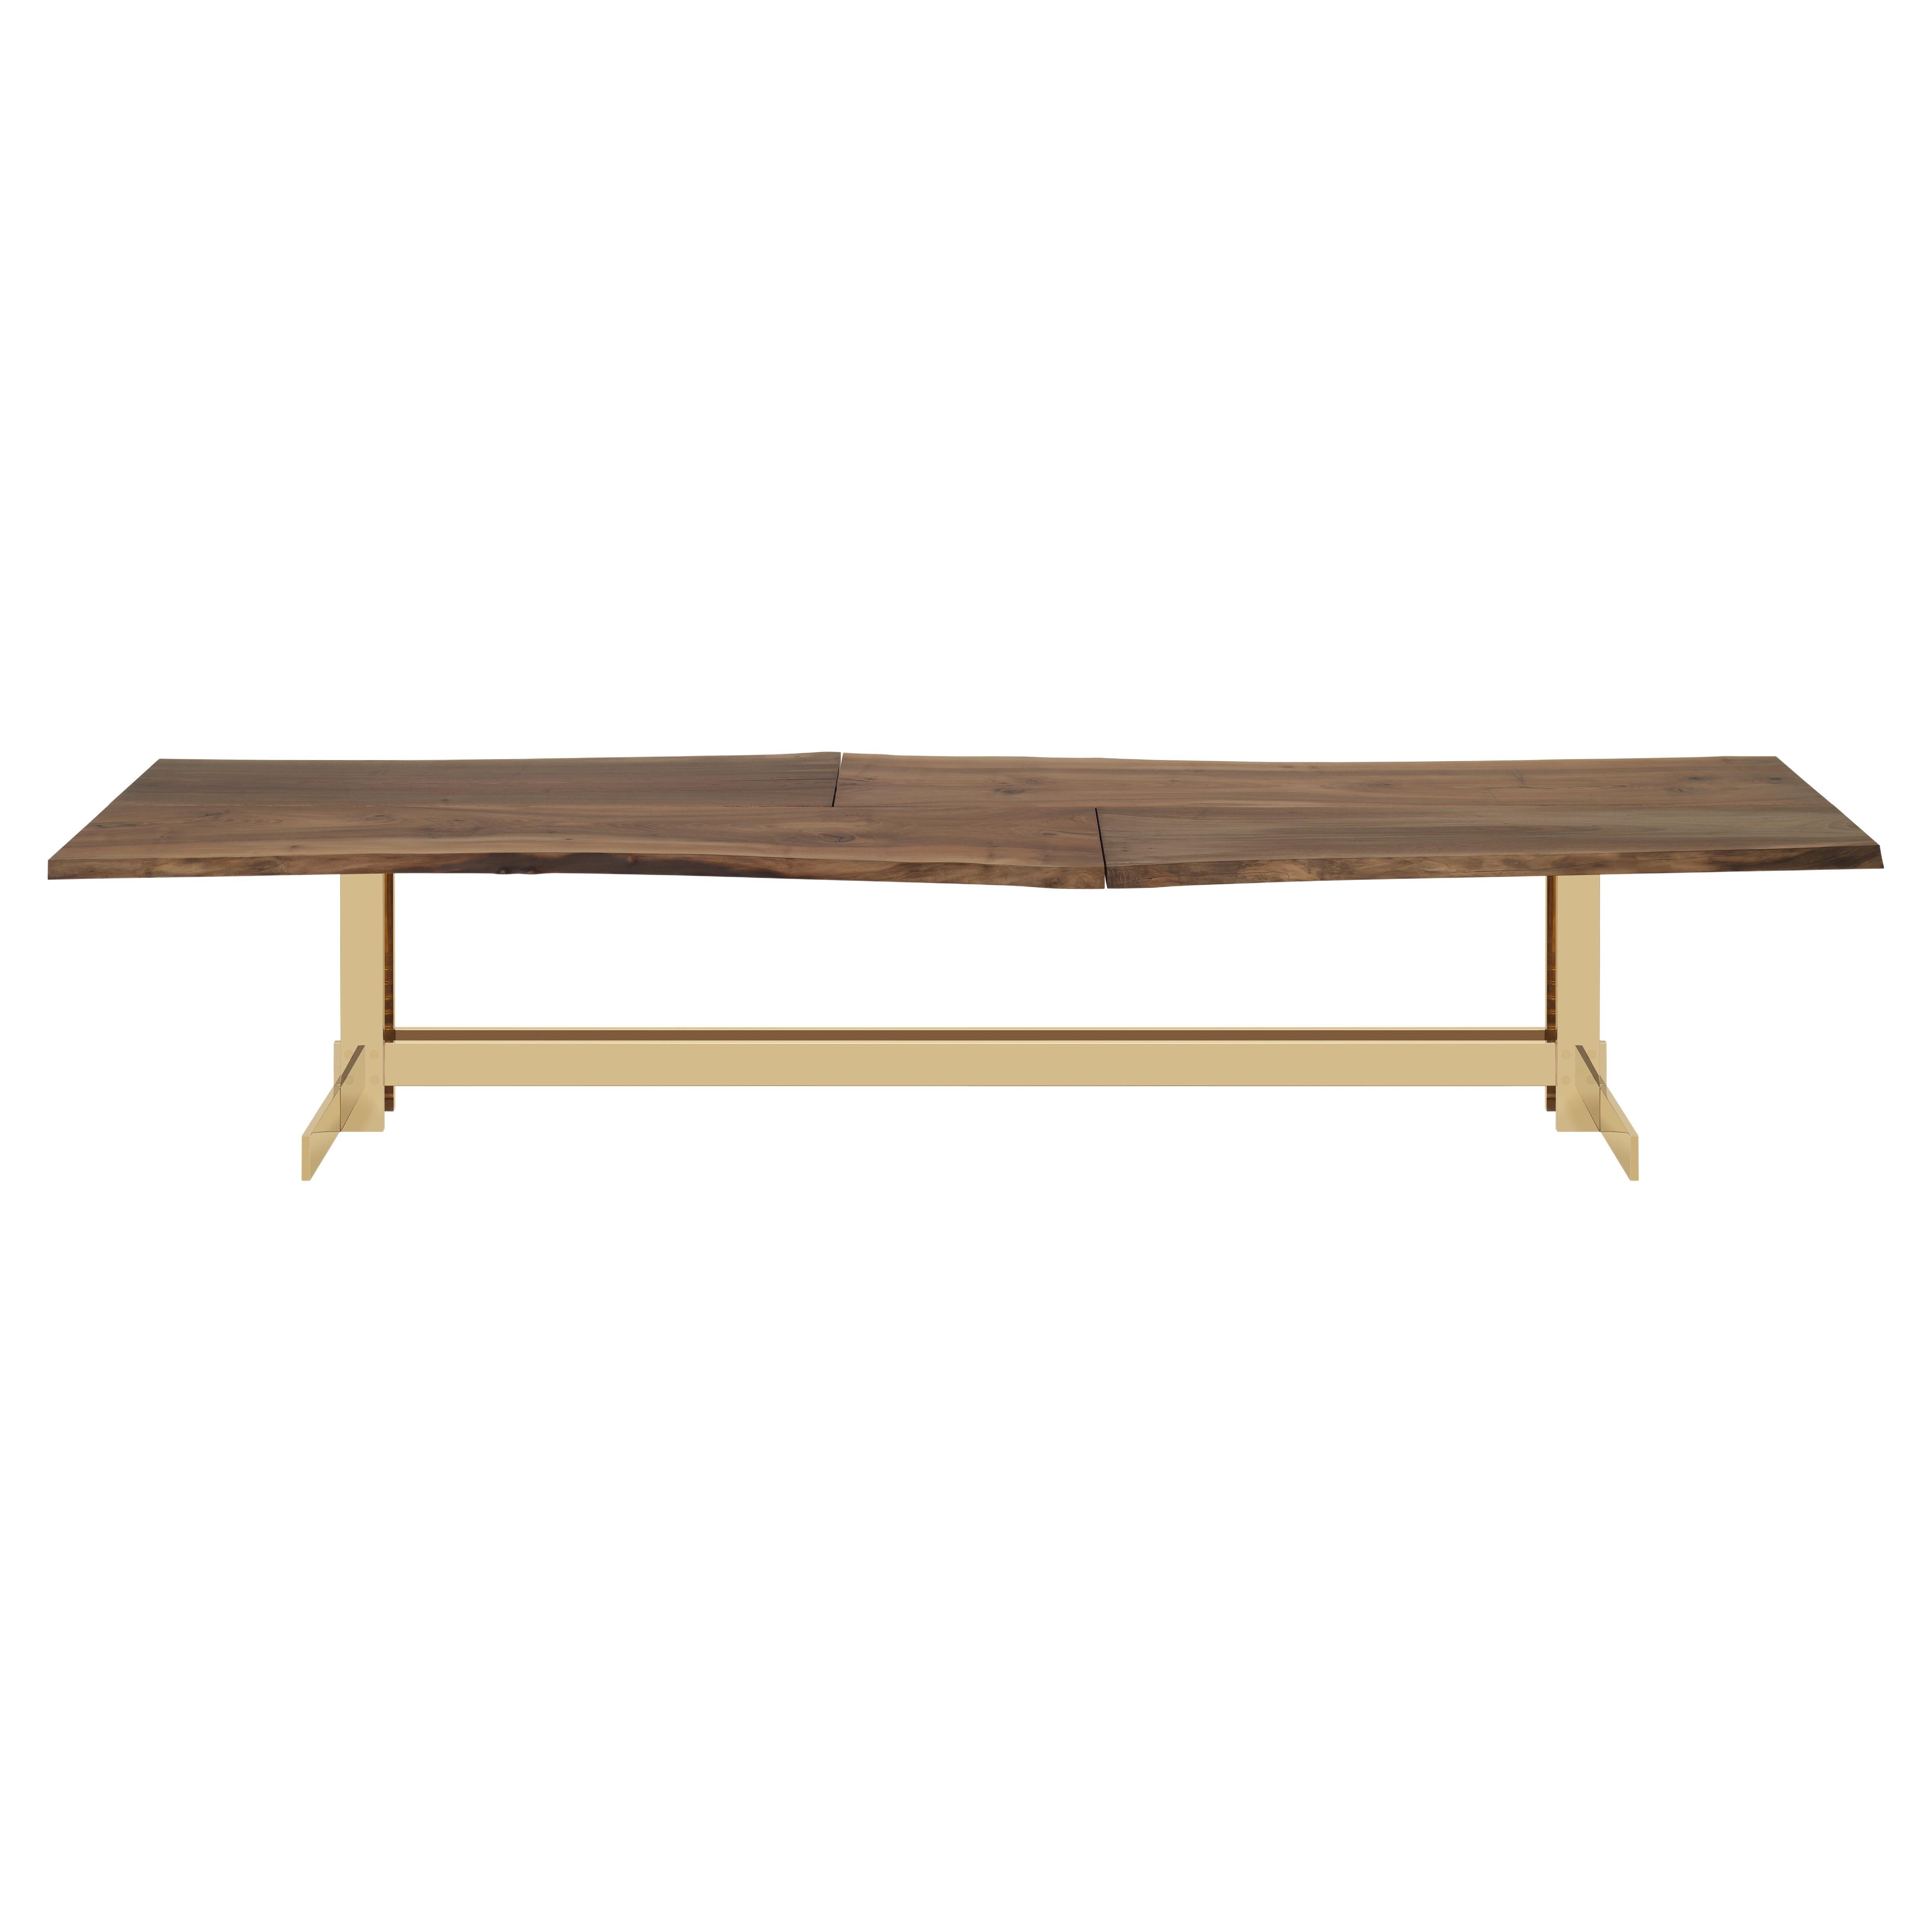 Philipp Mainzer Trunk II Table in Walnut and Polished Brass for E15 Selected For Sale